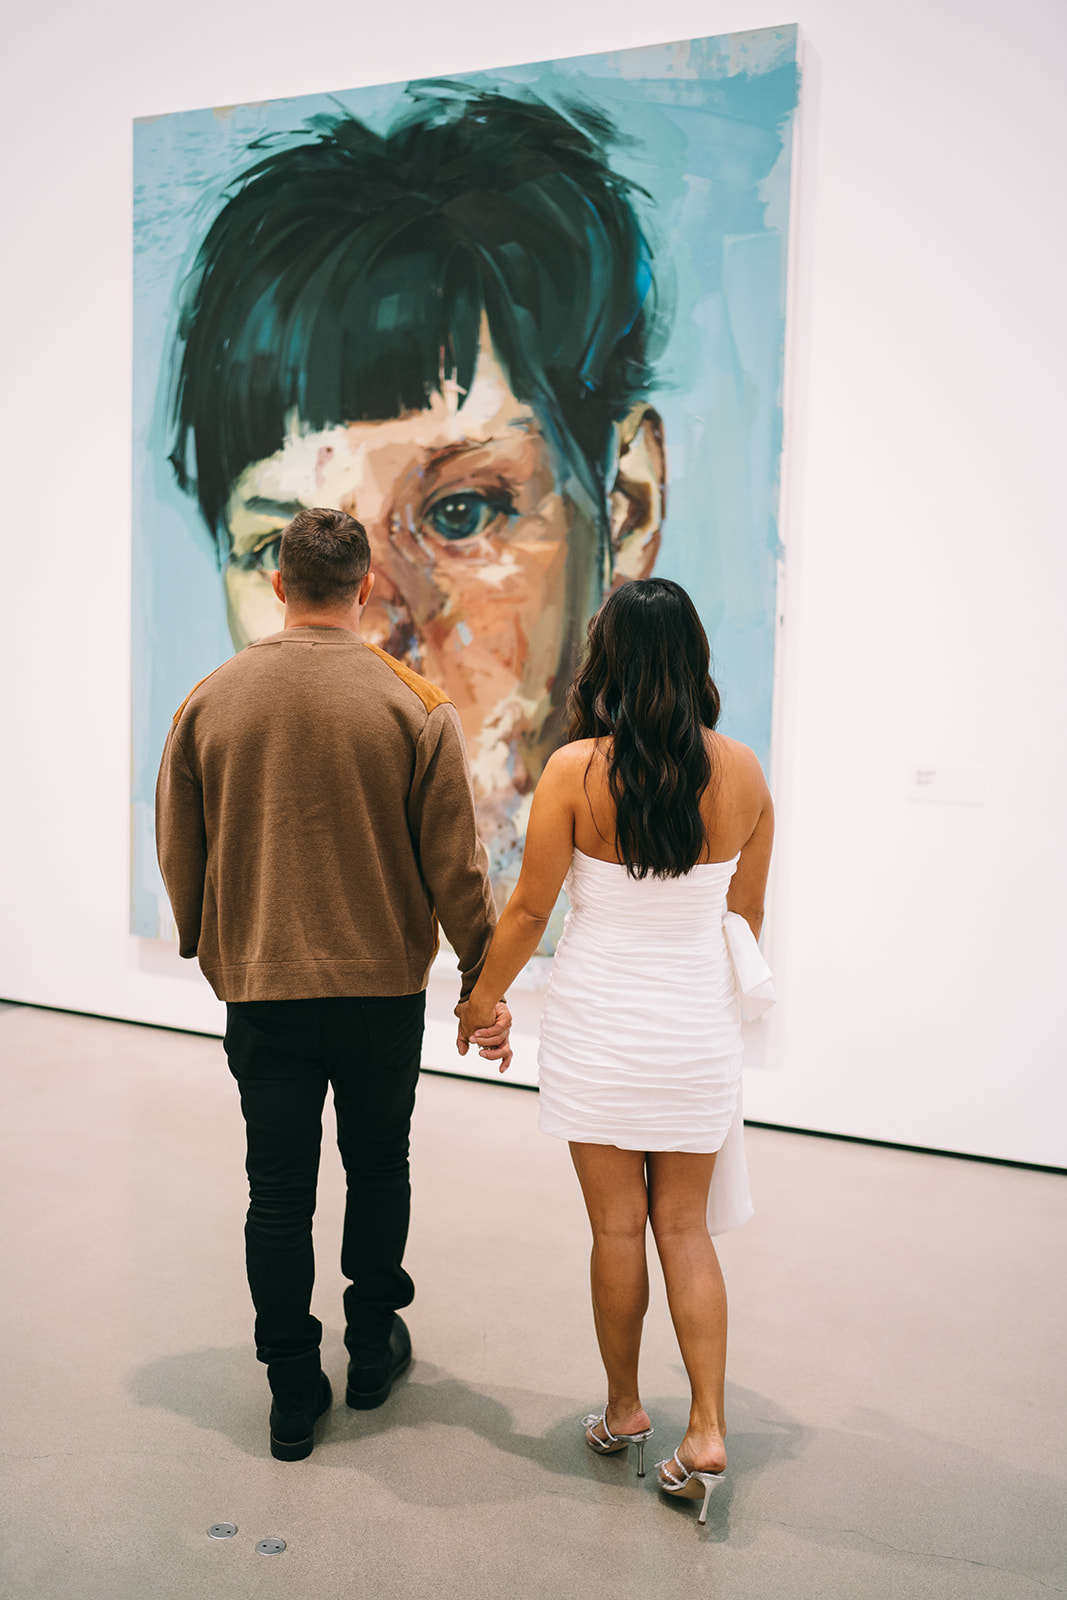 Woman in white dress and man in brown sweater looking at a piece of art of a boy with black hair